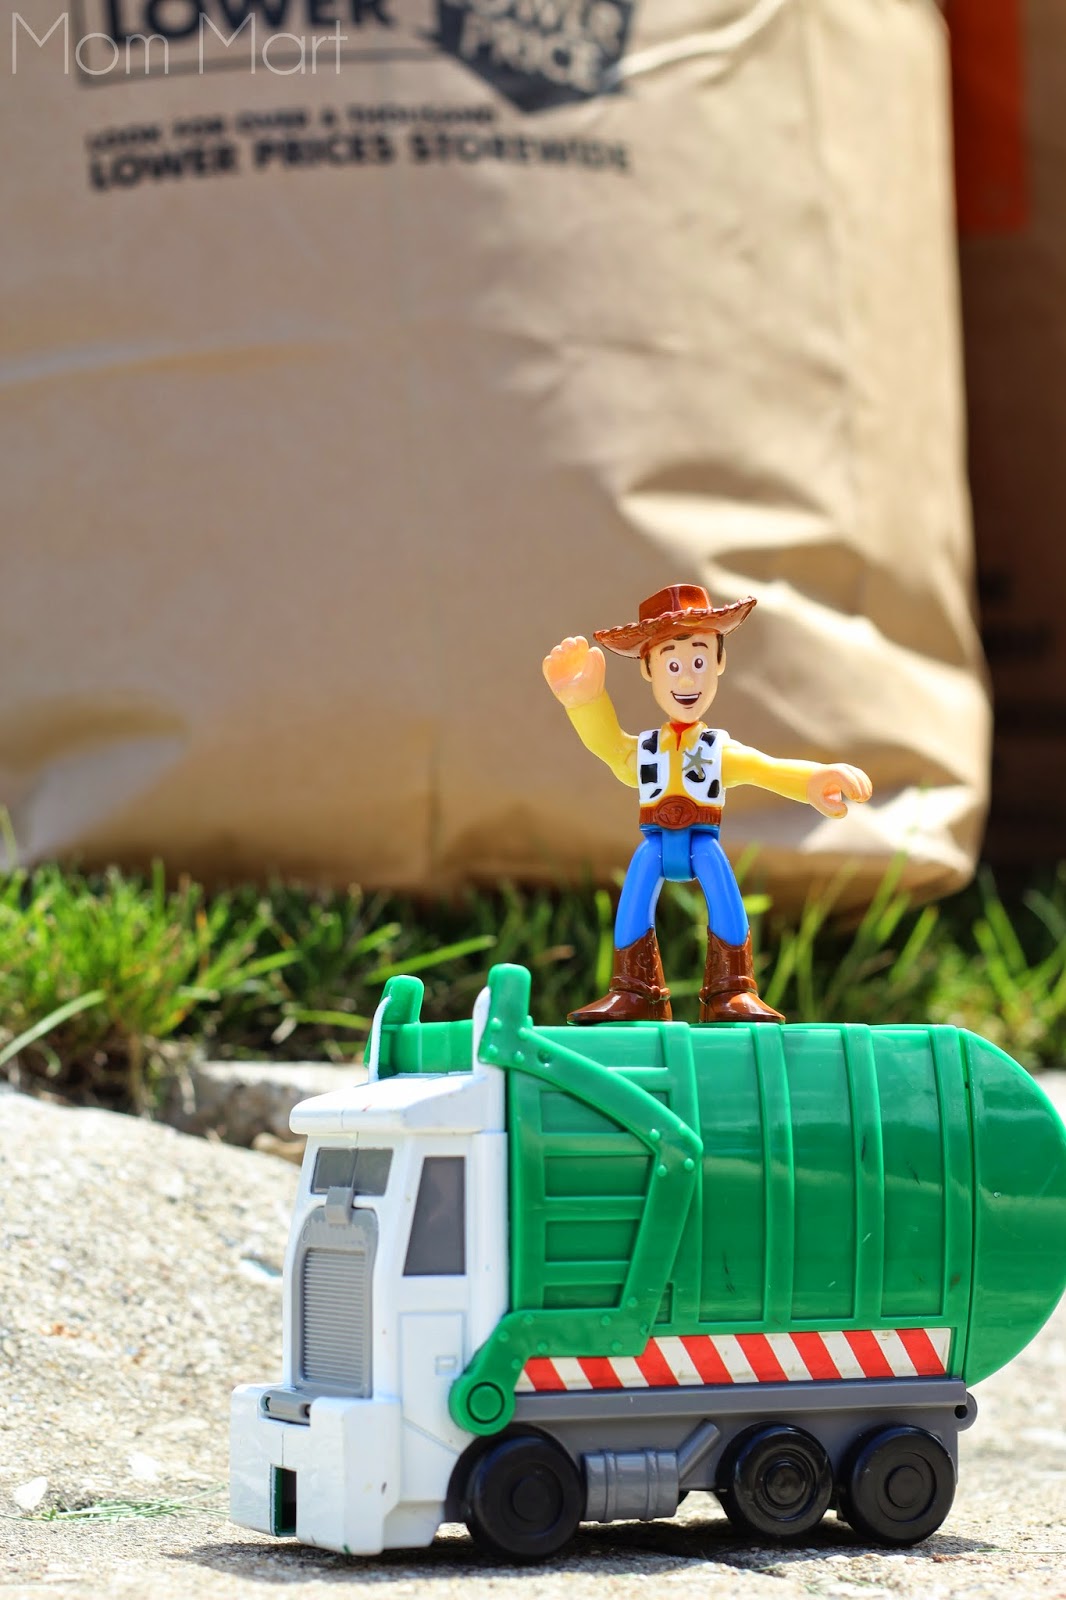 A few of our favorite toys #ToyStoryToys #Disney #FisherPrice #PlayTime #Woody